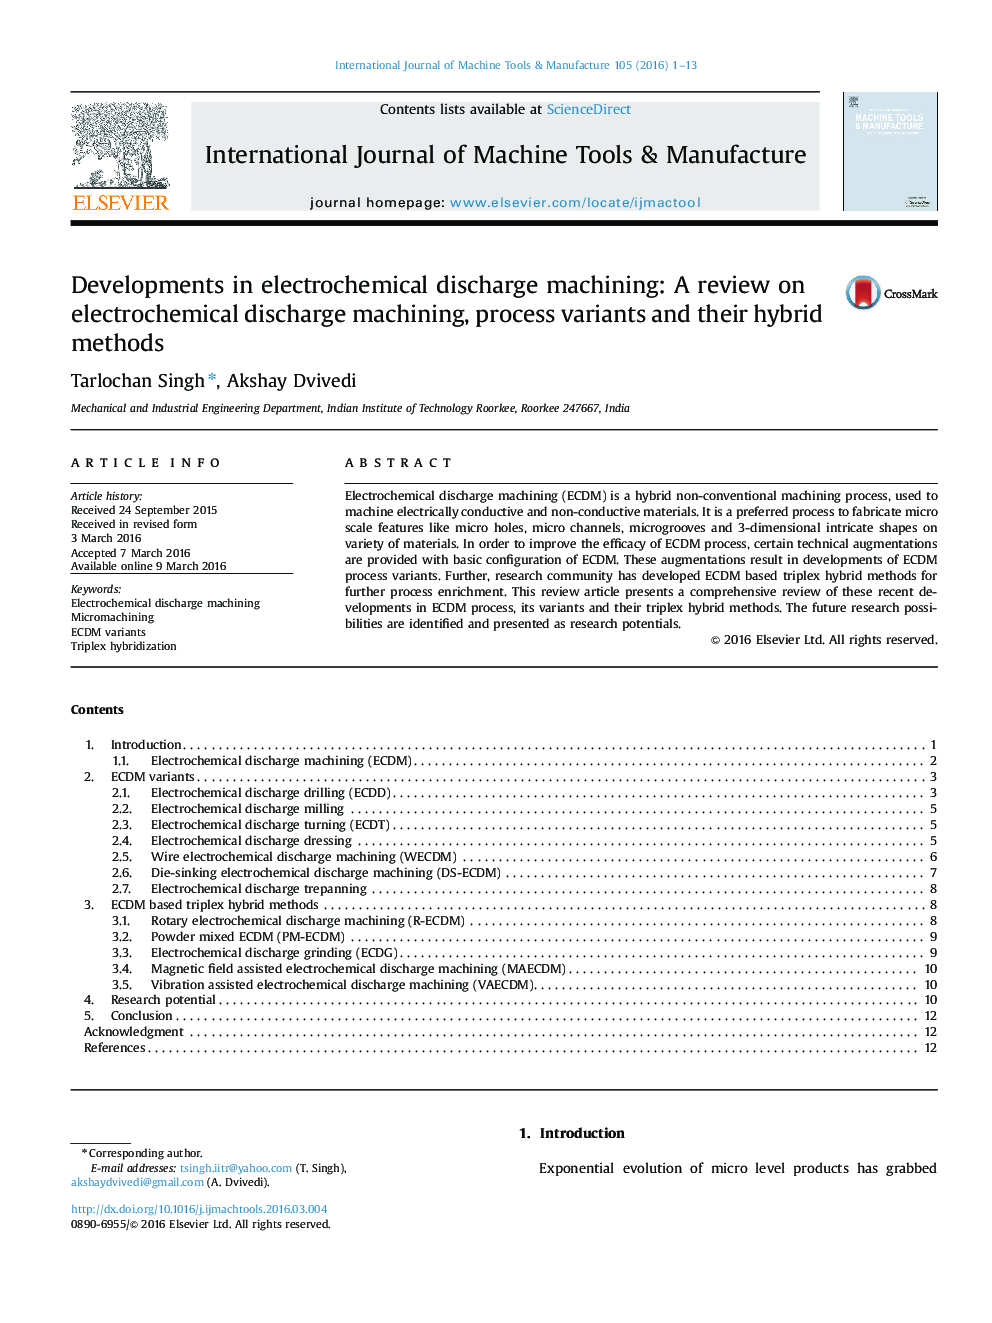 Developments in electrochemical discharge machining: A review on electrochemical discharge machining, process variants and their hybrid methods